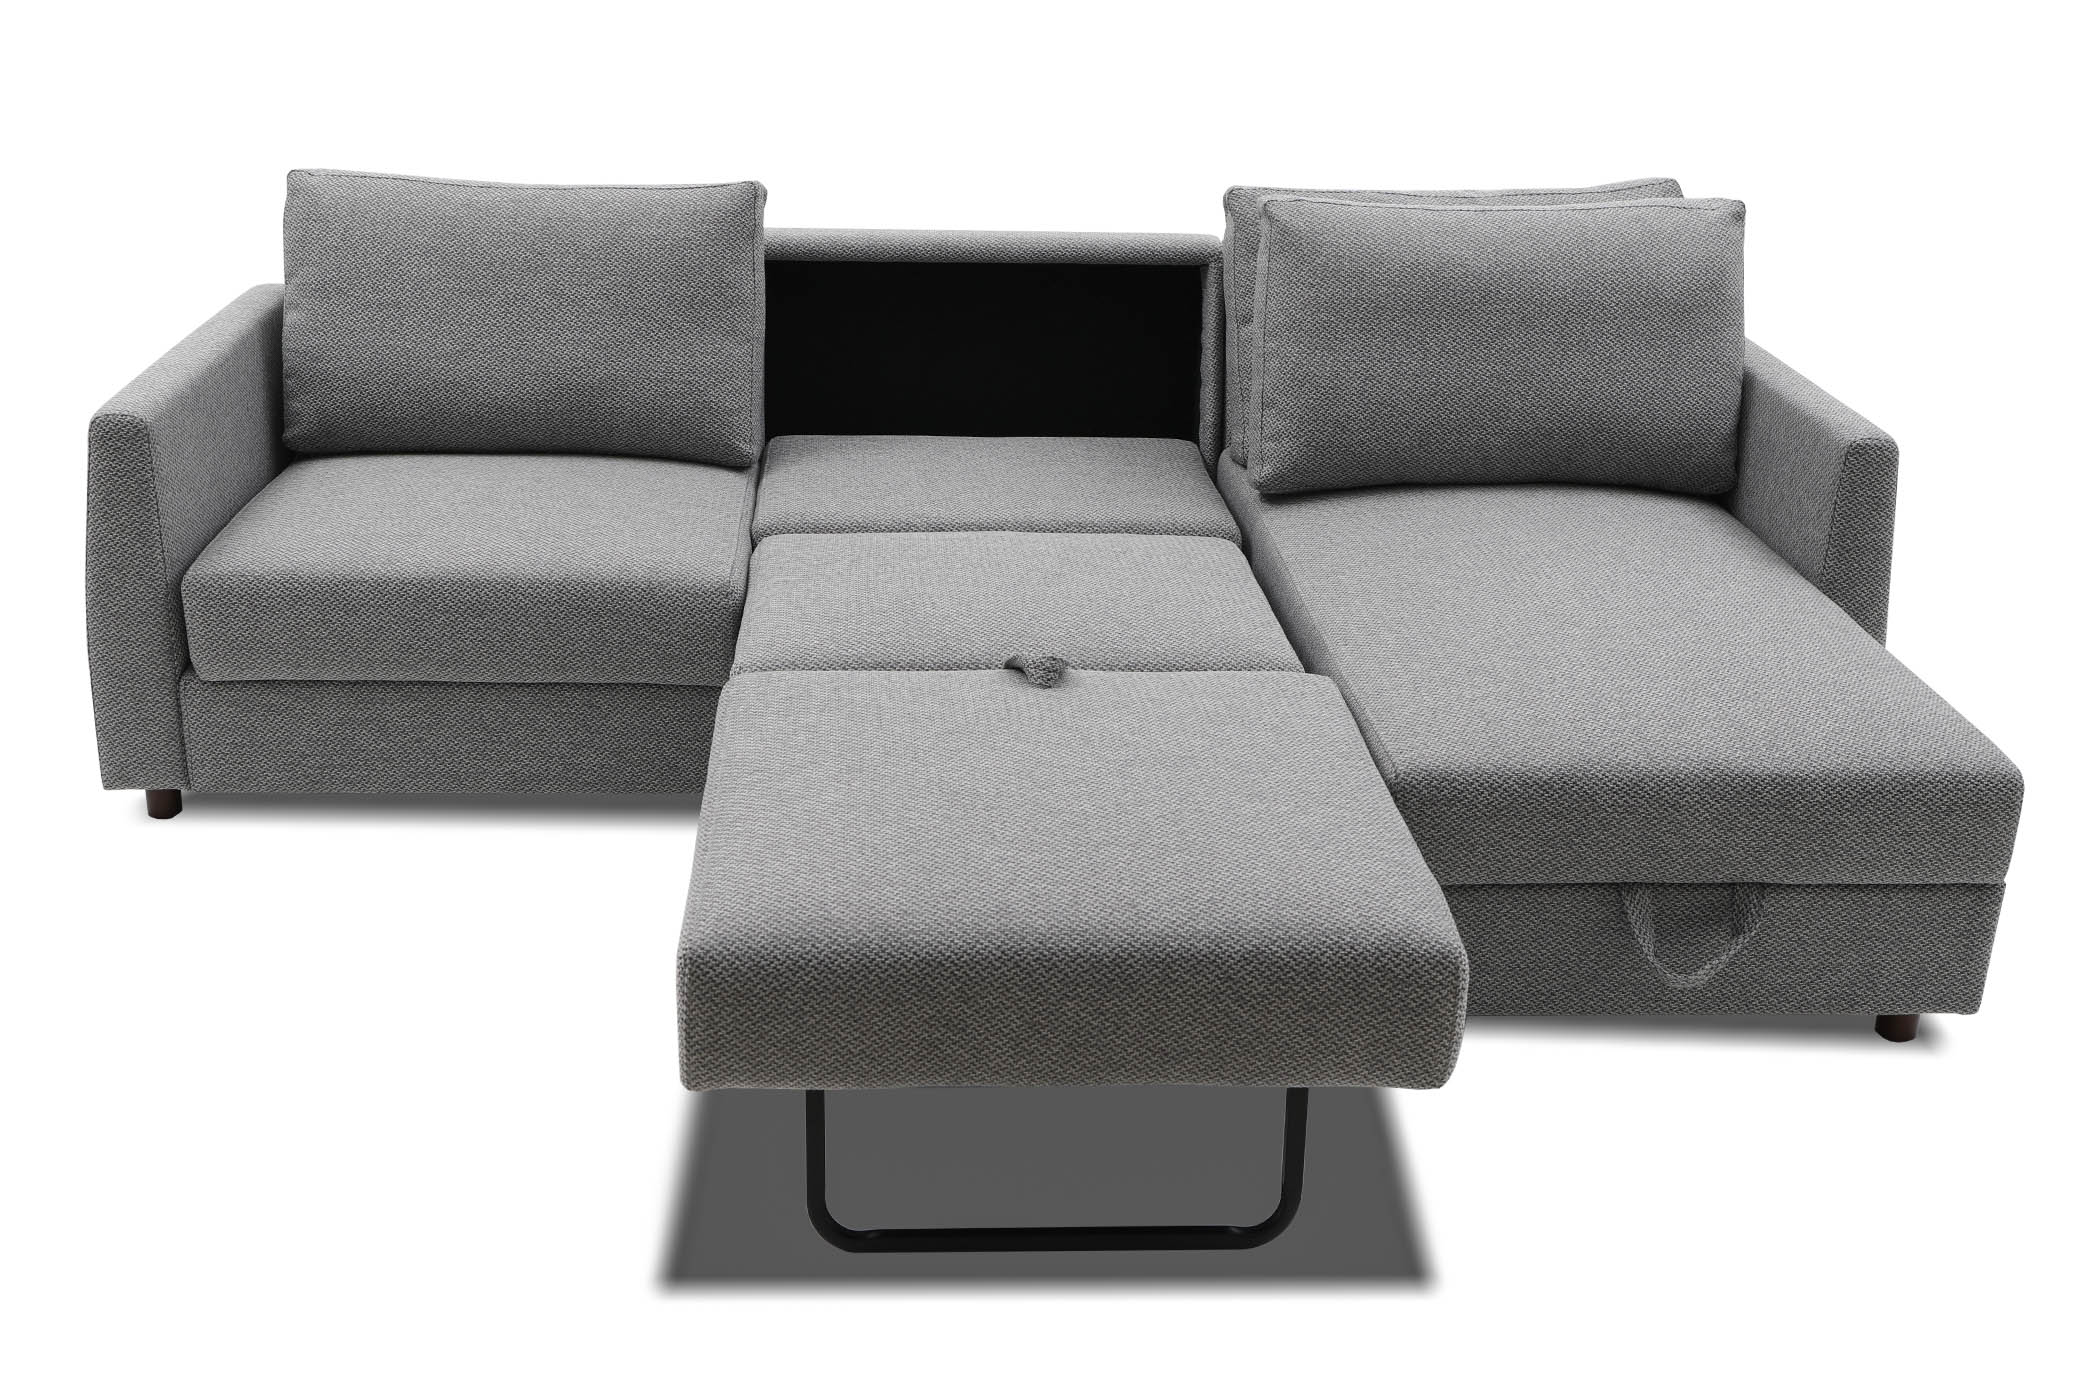 Bergen Reversible Sectional Sofa Bed With Storage